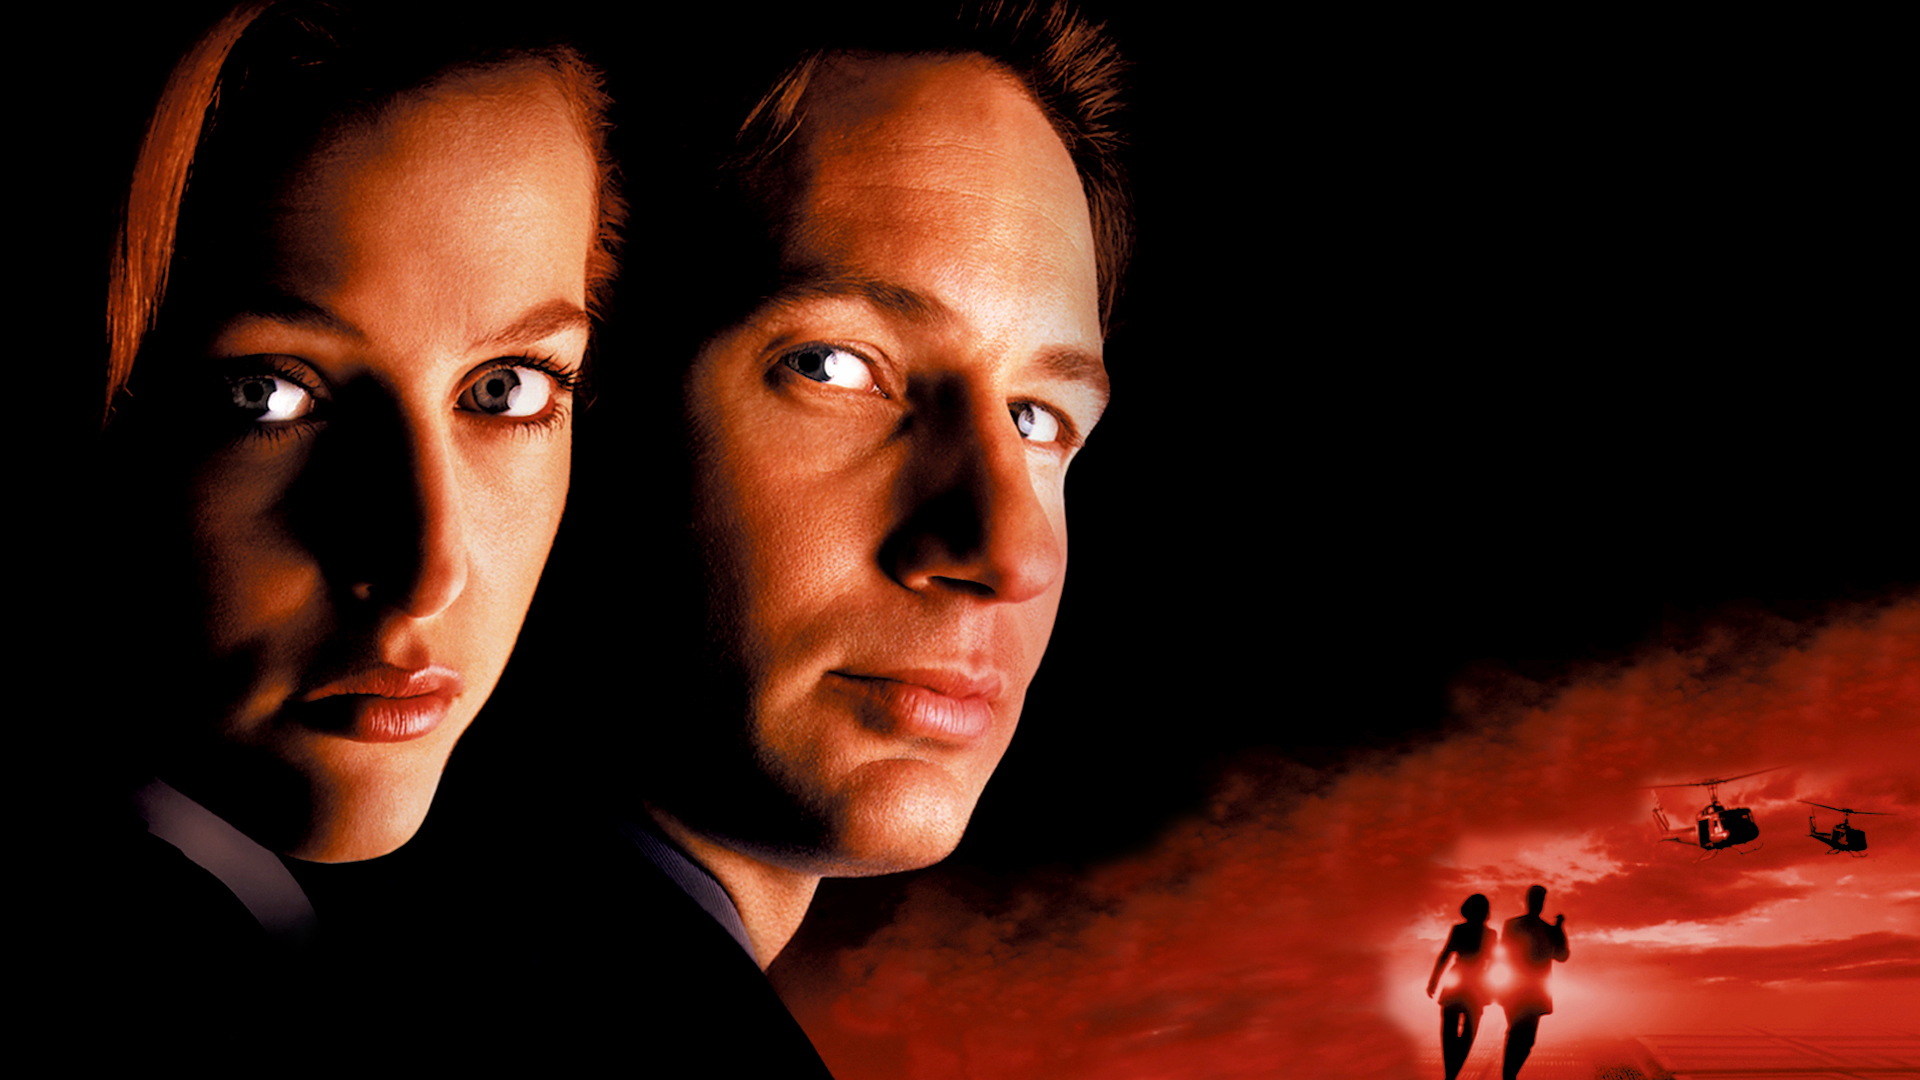 The X-Files Wallpapers